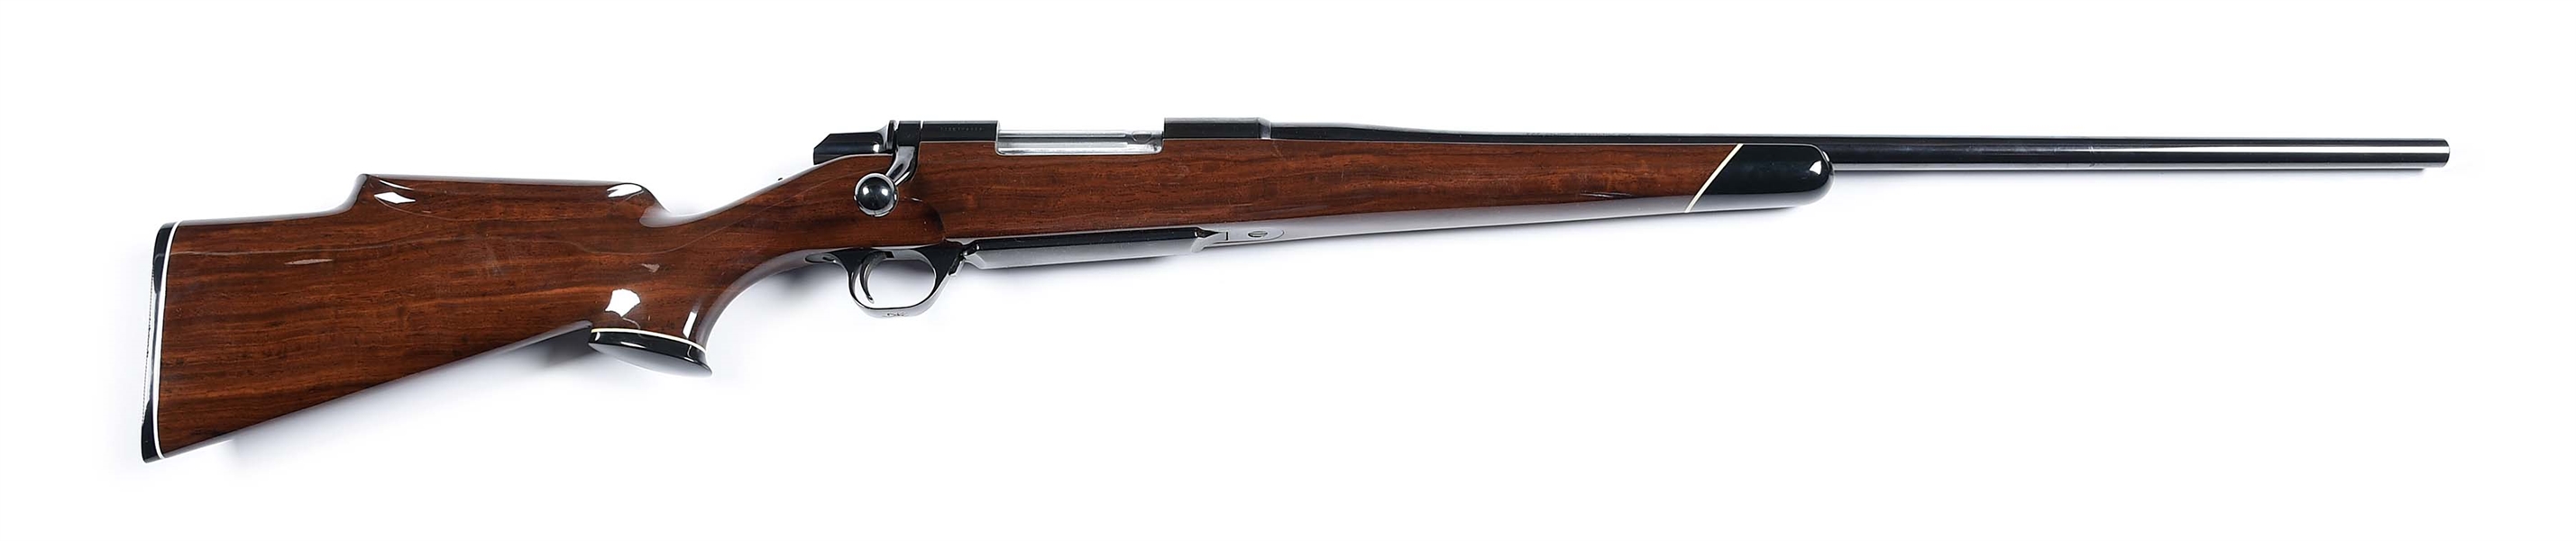 (M) BROWNING BBR BOLT ACTION RIFLE WITH LEAD WOOD STOCK.